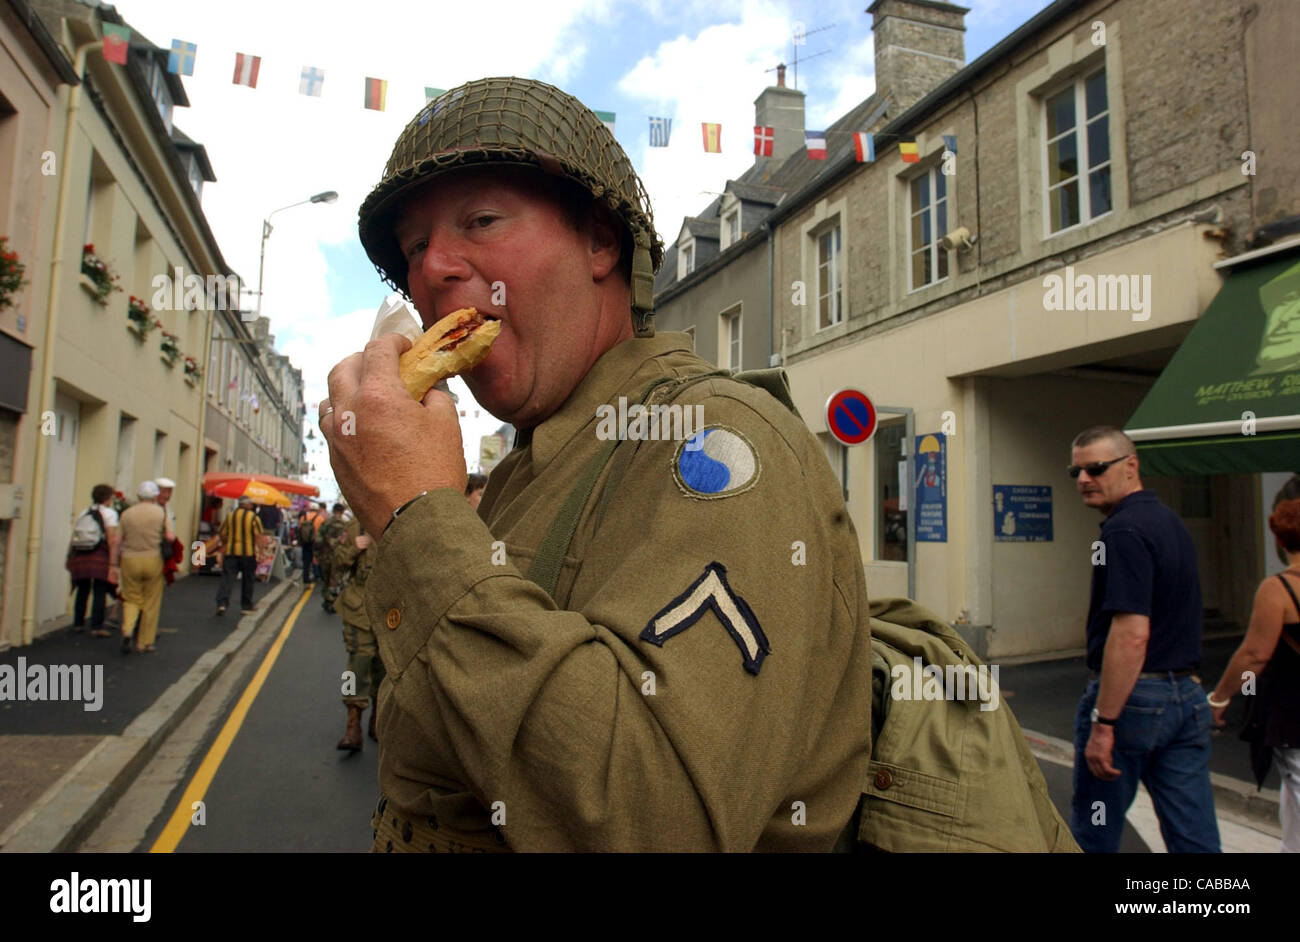 STATE - Alva Ford Jr. of Salem, W. Va, enjoys a sausage dog in the town of Ste. Mere Eglise, France, on June 5, 2004. Ford, a Navy veteran and re-enactor, wears the uniform of an Army private of the U.S. 29th Division, which landed at Normandy on June 6, 1944. American veterans and others have gathe Stock Photo